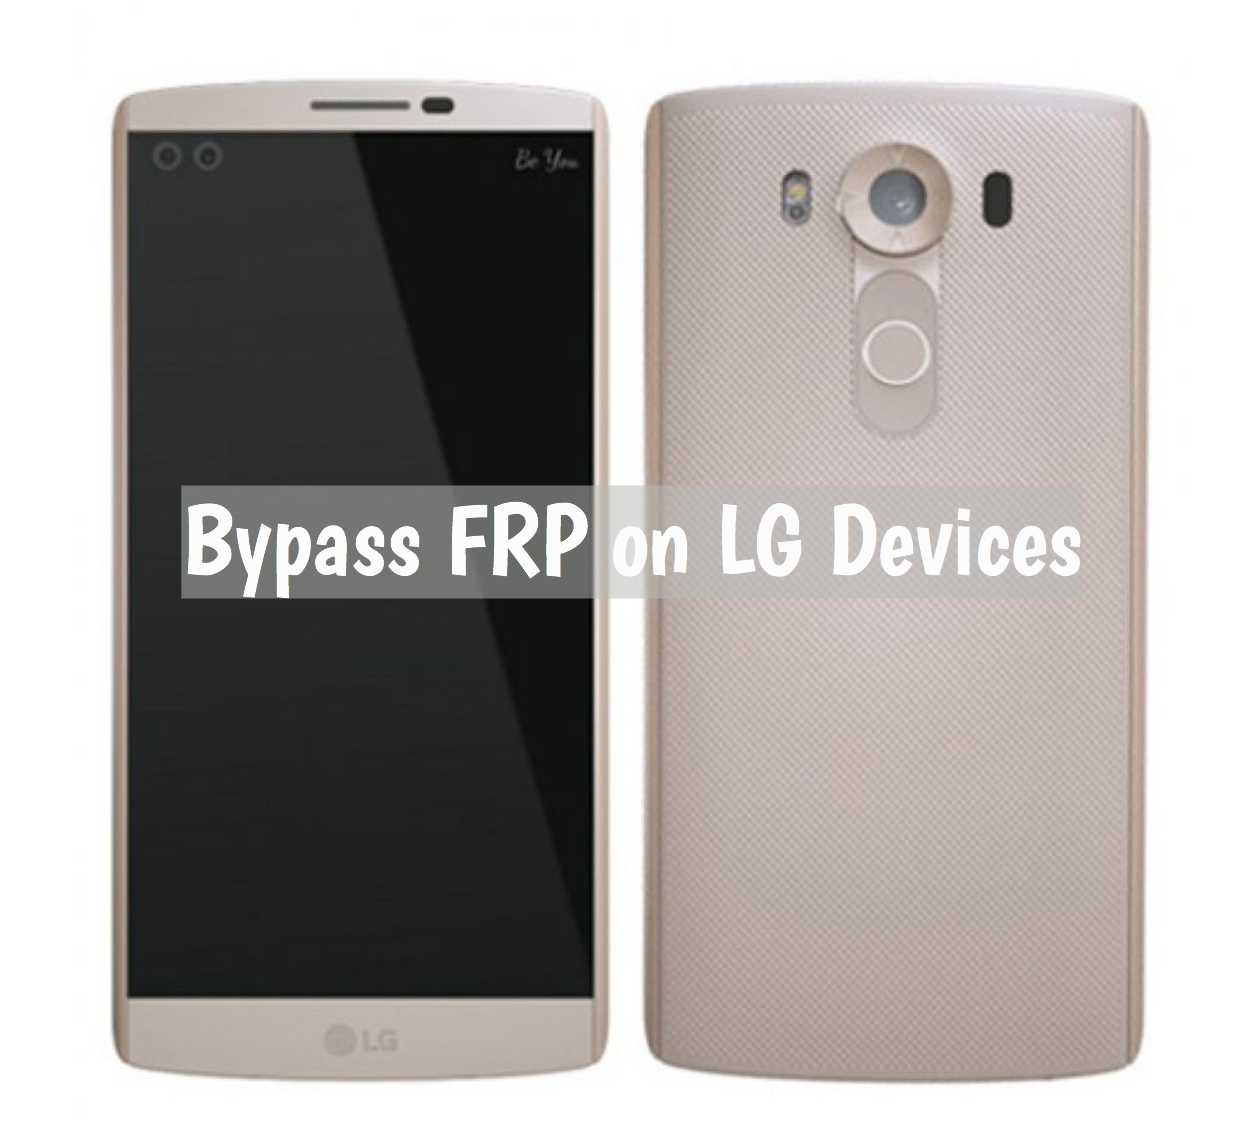 Bypass FRP on LG Devices